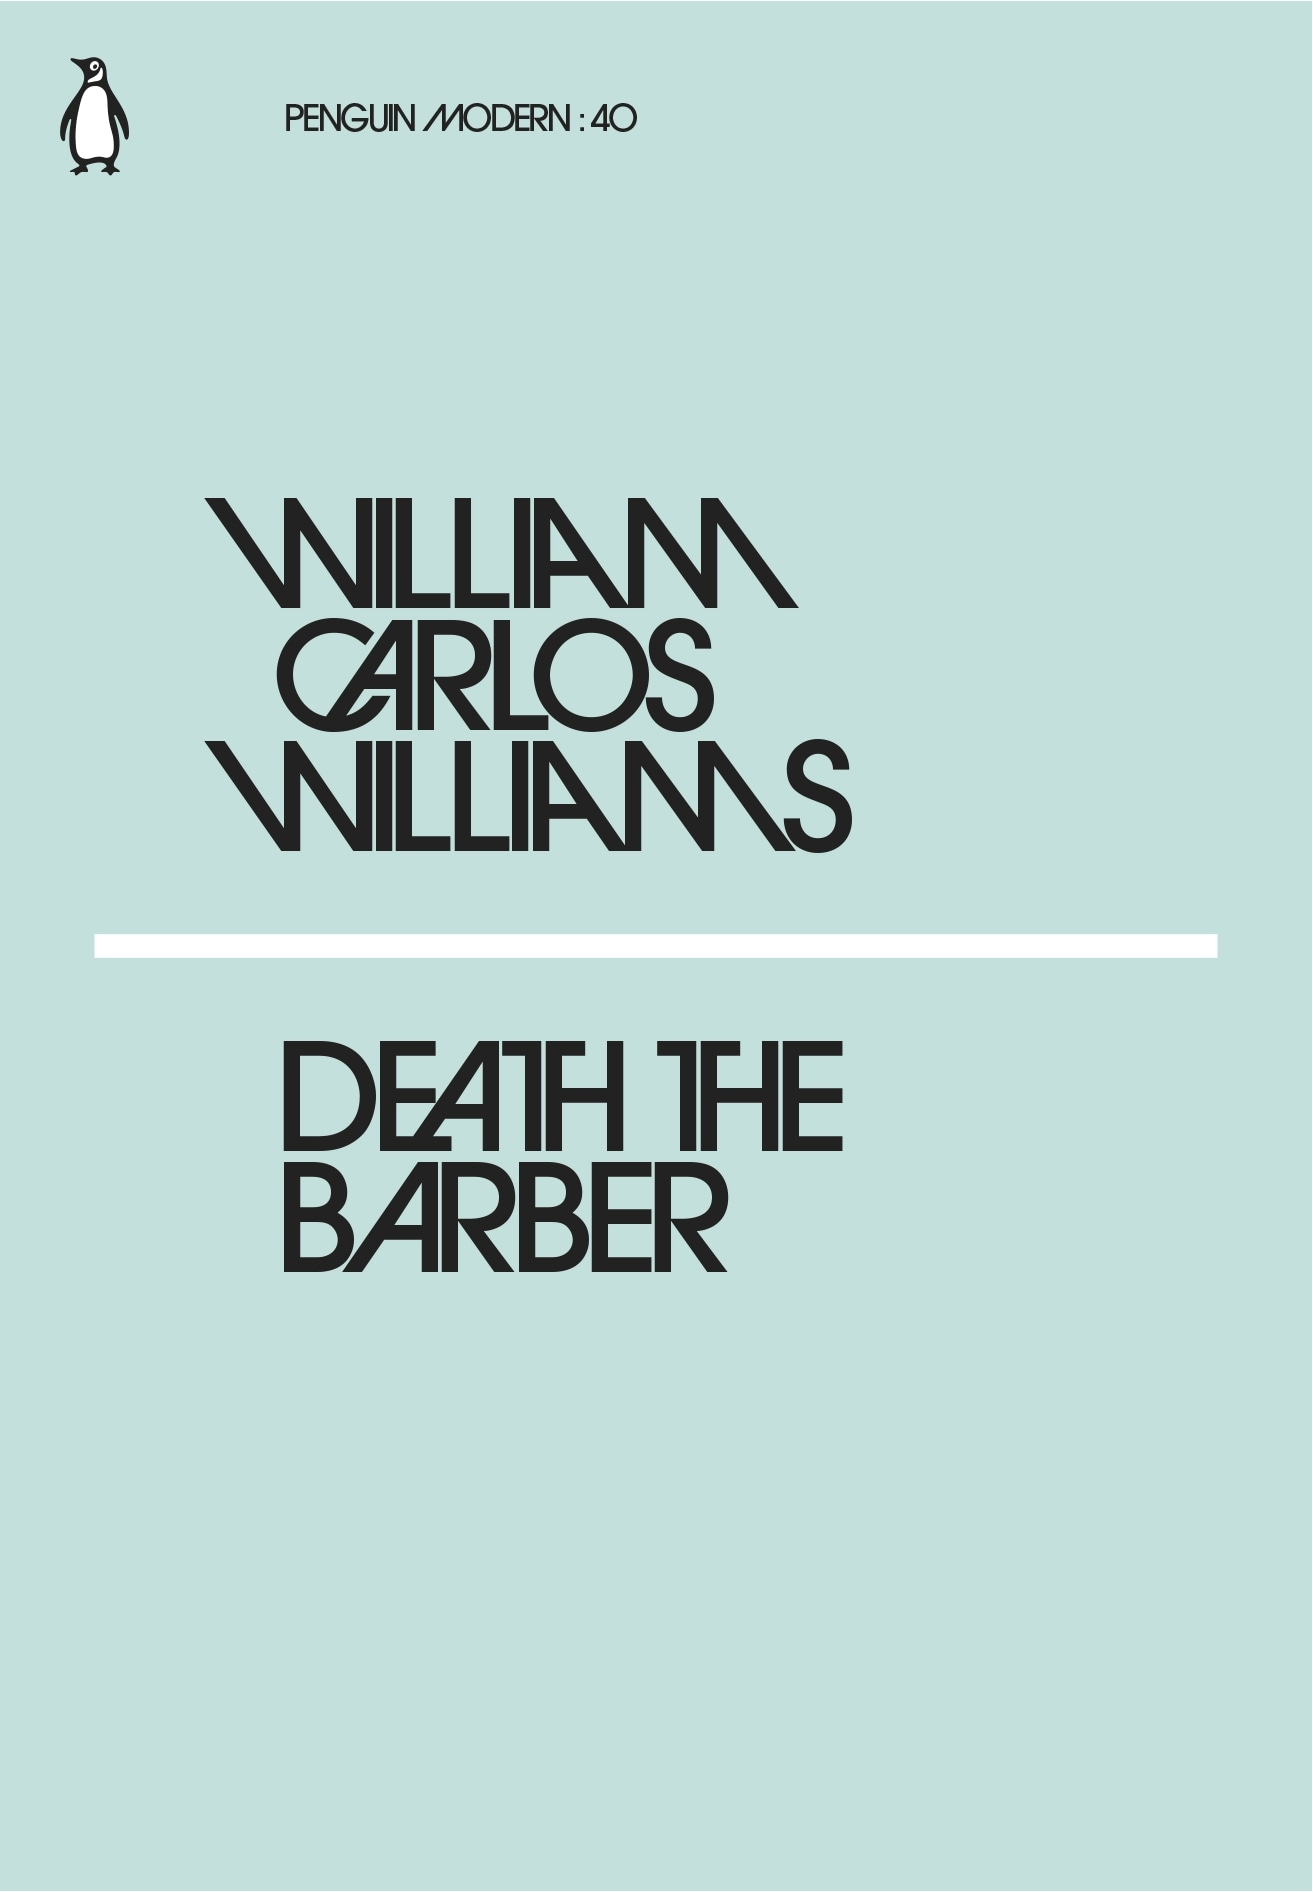 Book “Death the Barber” by William Carlos Williams — February 22, 2018